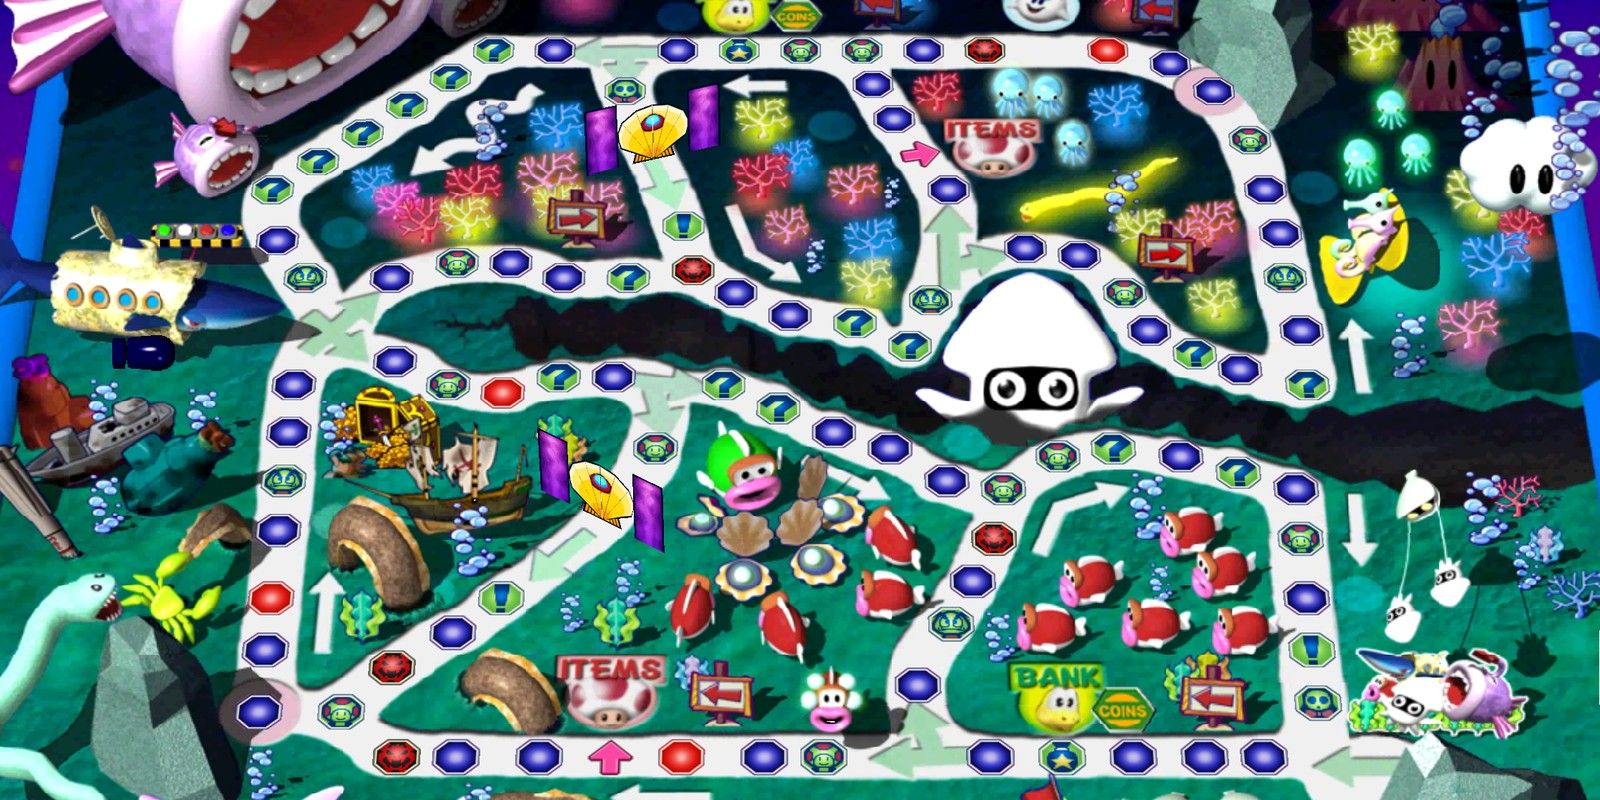 An overview of the Deep Bloober Sea board from Mario Party 3